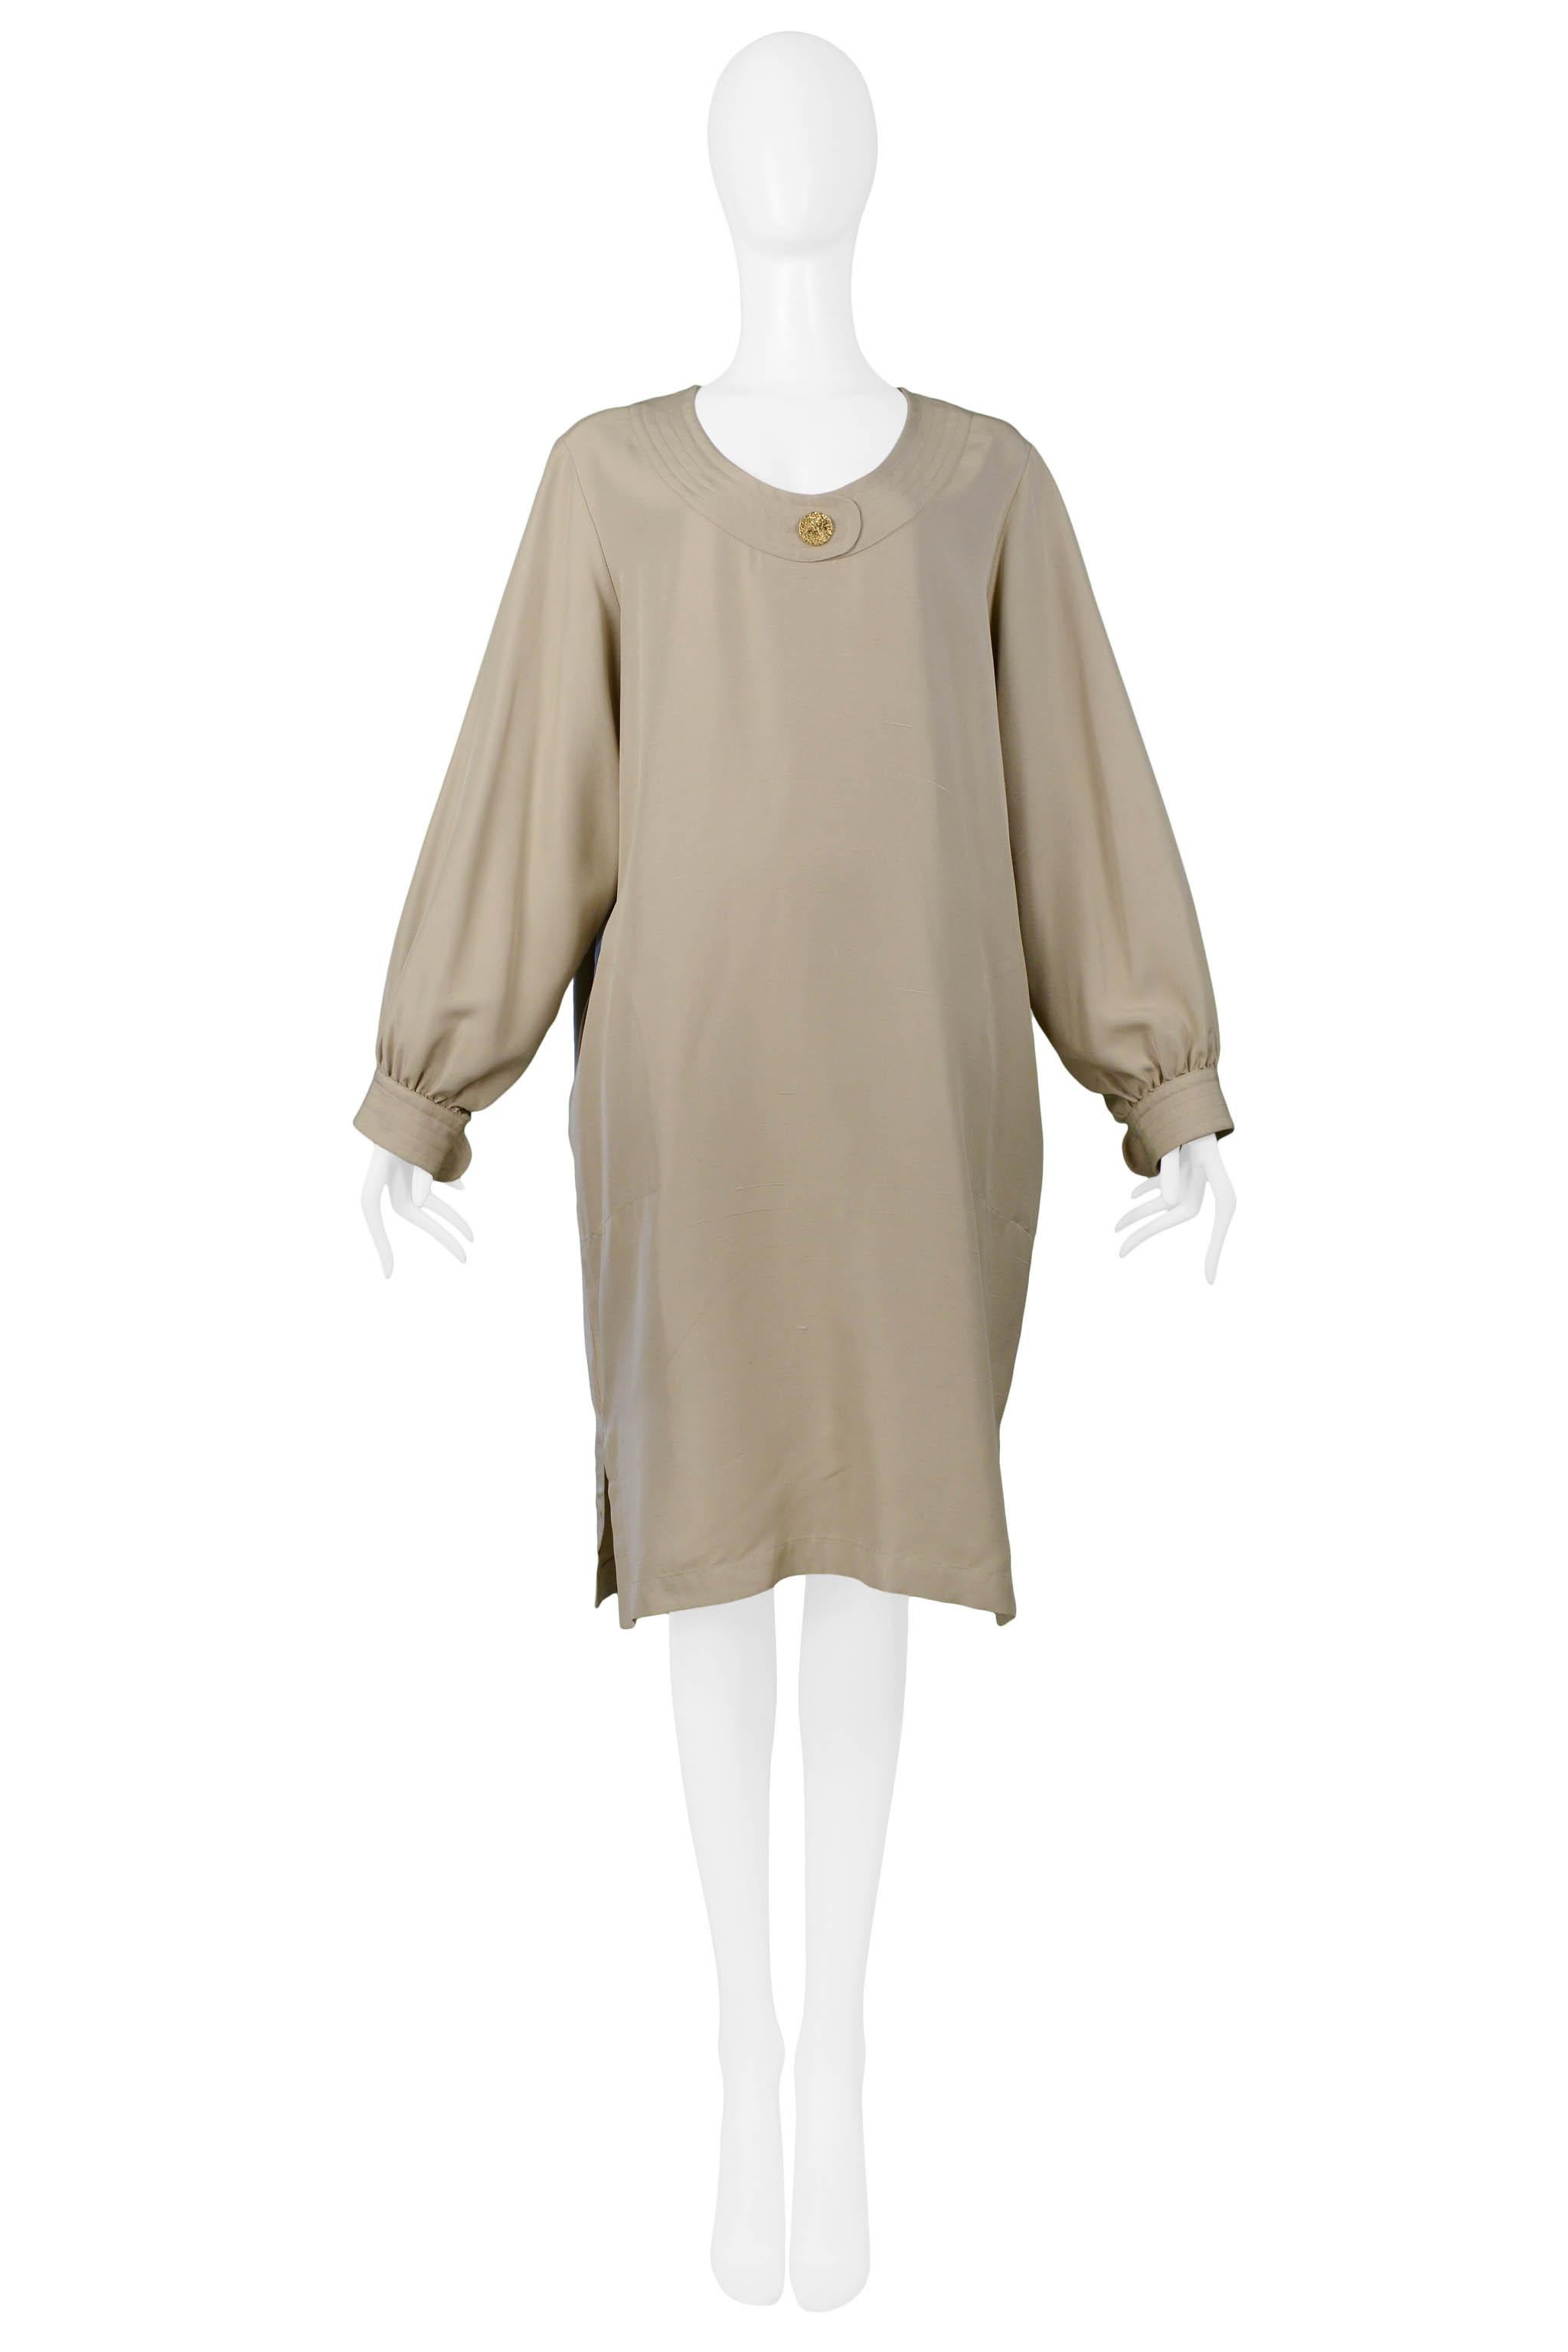 Resurrection Vintage is excited to offer a vintage Yves Saint Laurent khaki sack dress with gold buttons. Feels like silk or silk cotton. Very easy fit. Side pockets and slits.

Yves Saint Laurent
Size 4/6
Measurements: Measured Flat Not Stretched: